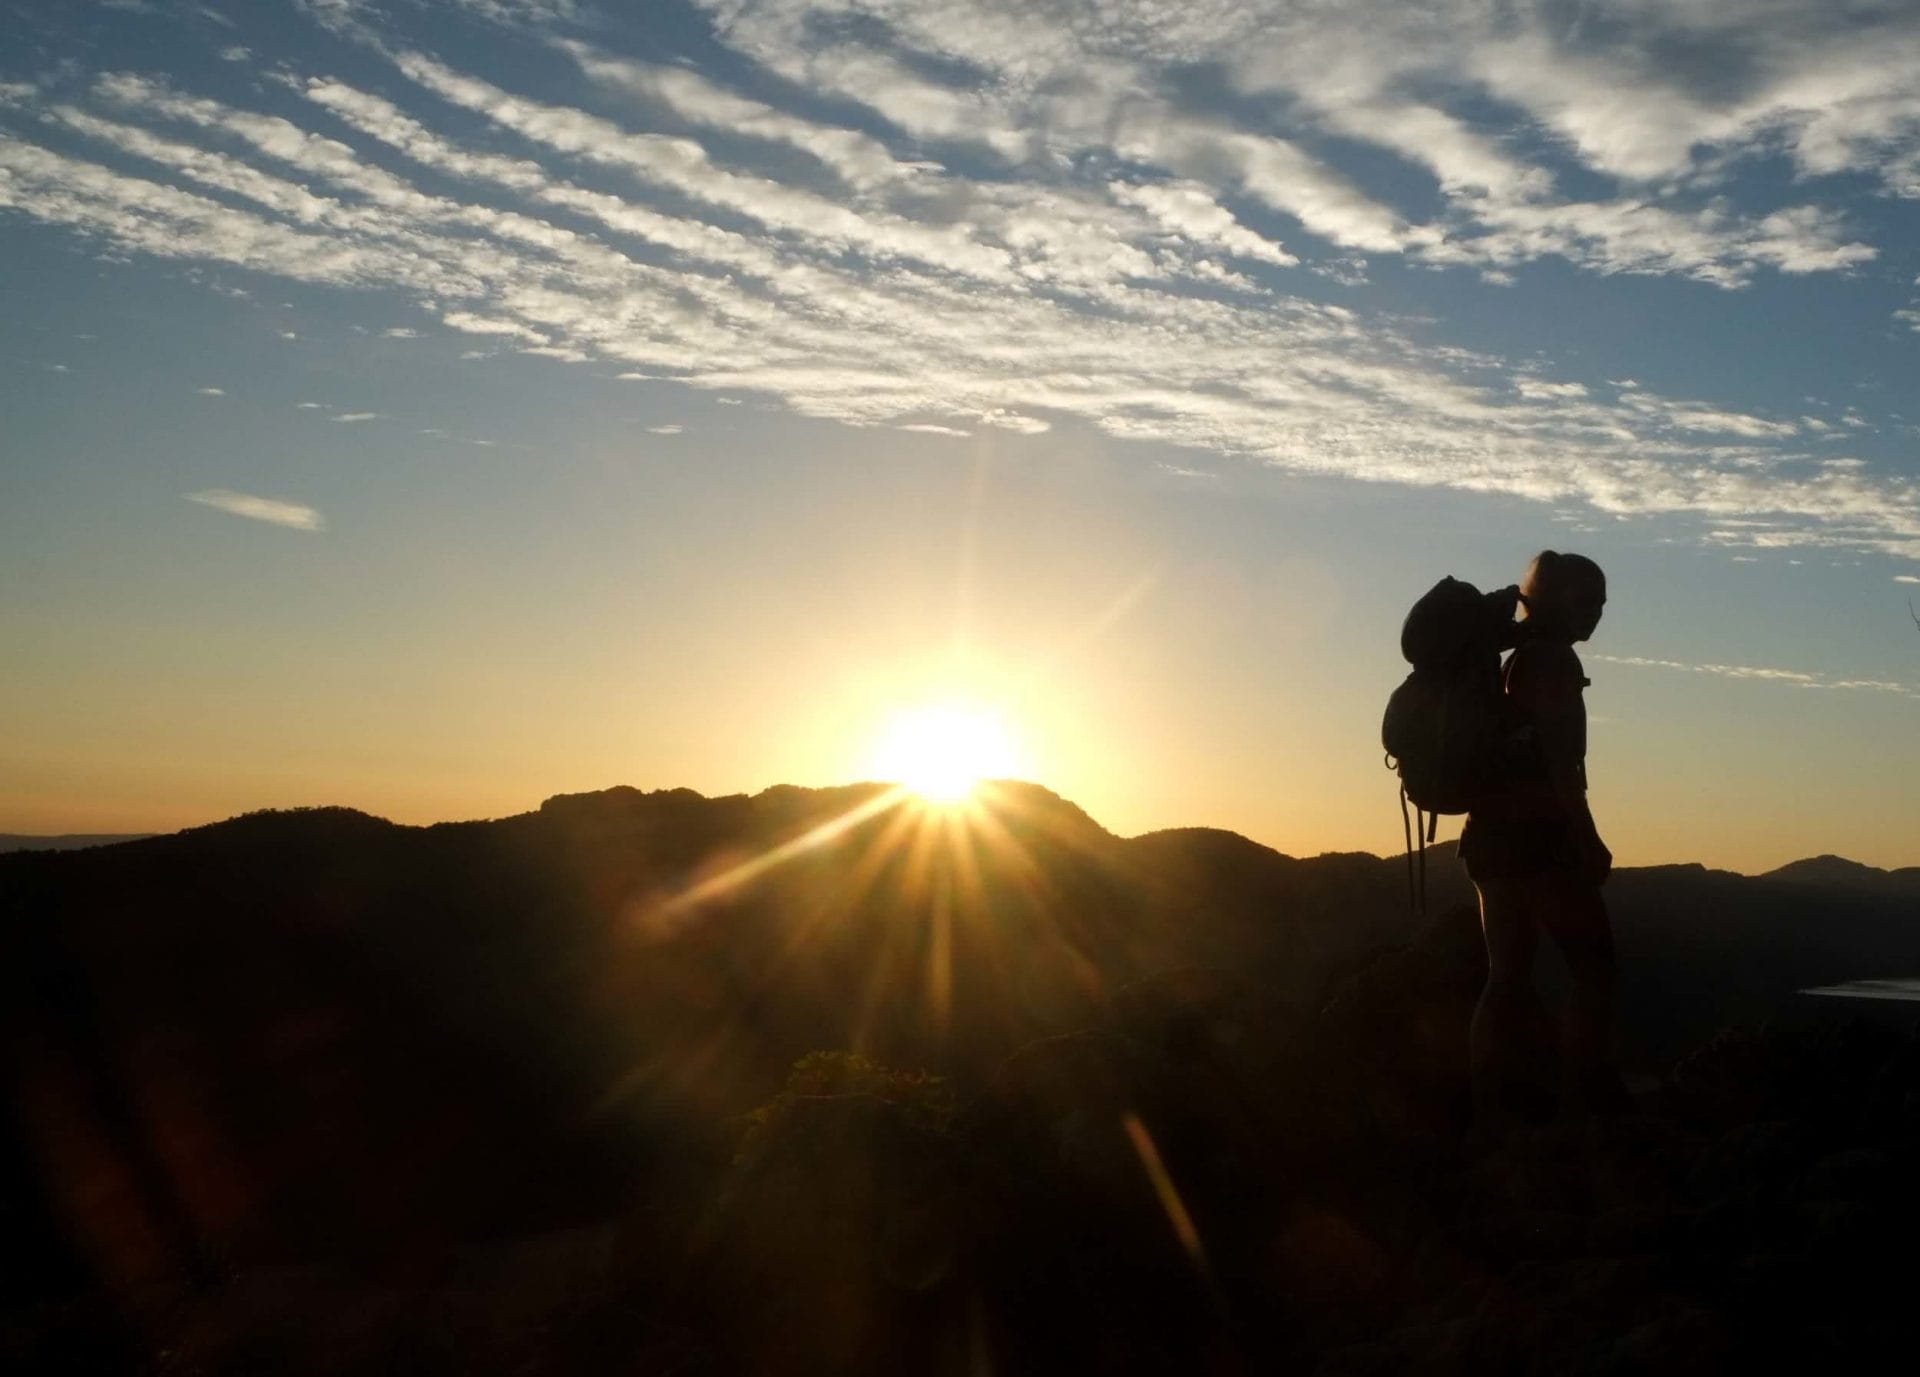 ruby bisson, get fitted for a hiking backpack, photo by Rhianna, mr timbuktu, sunset, silhouette